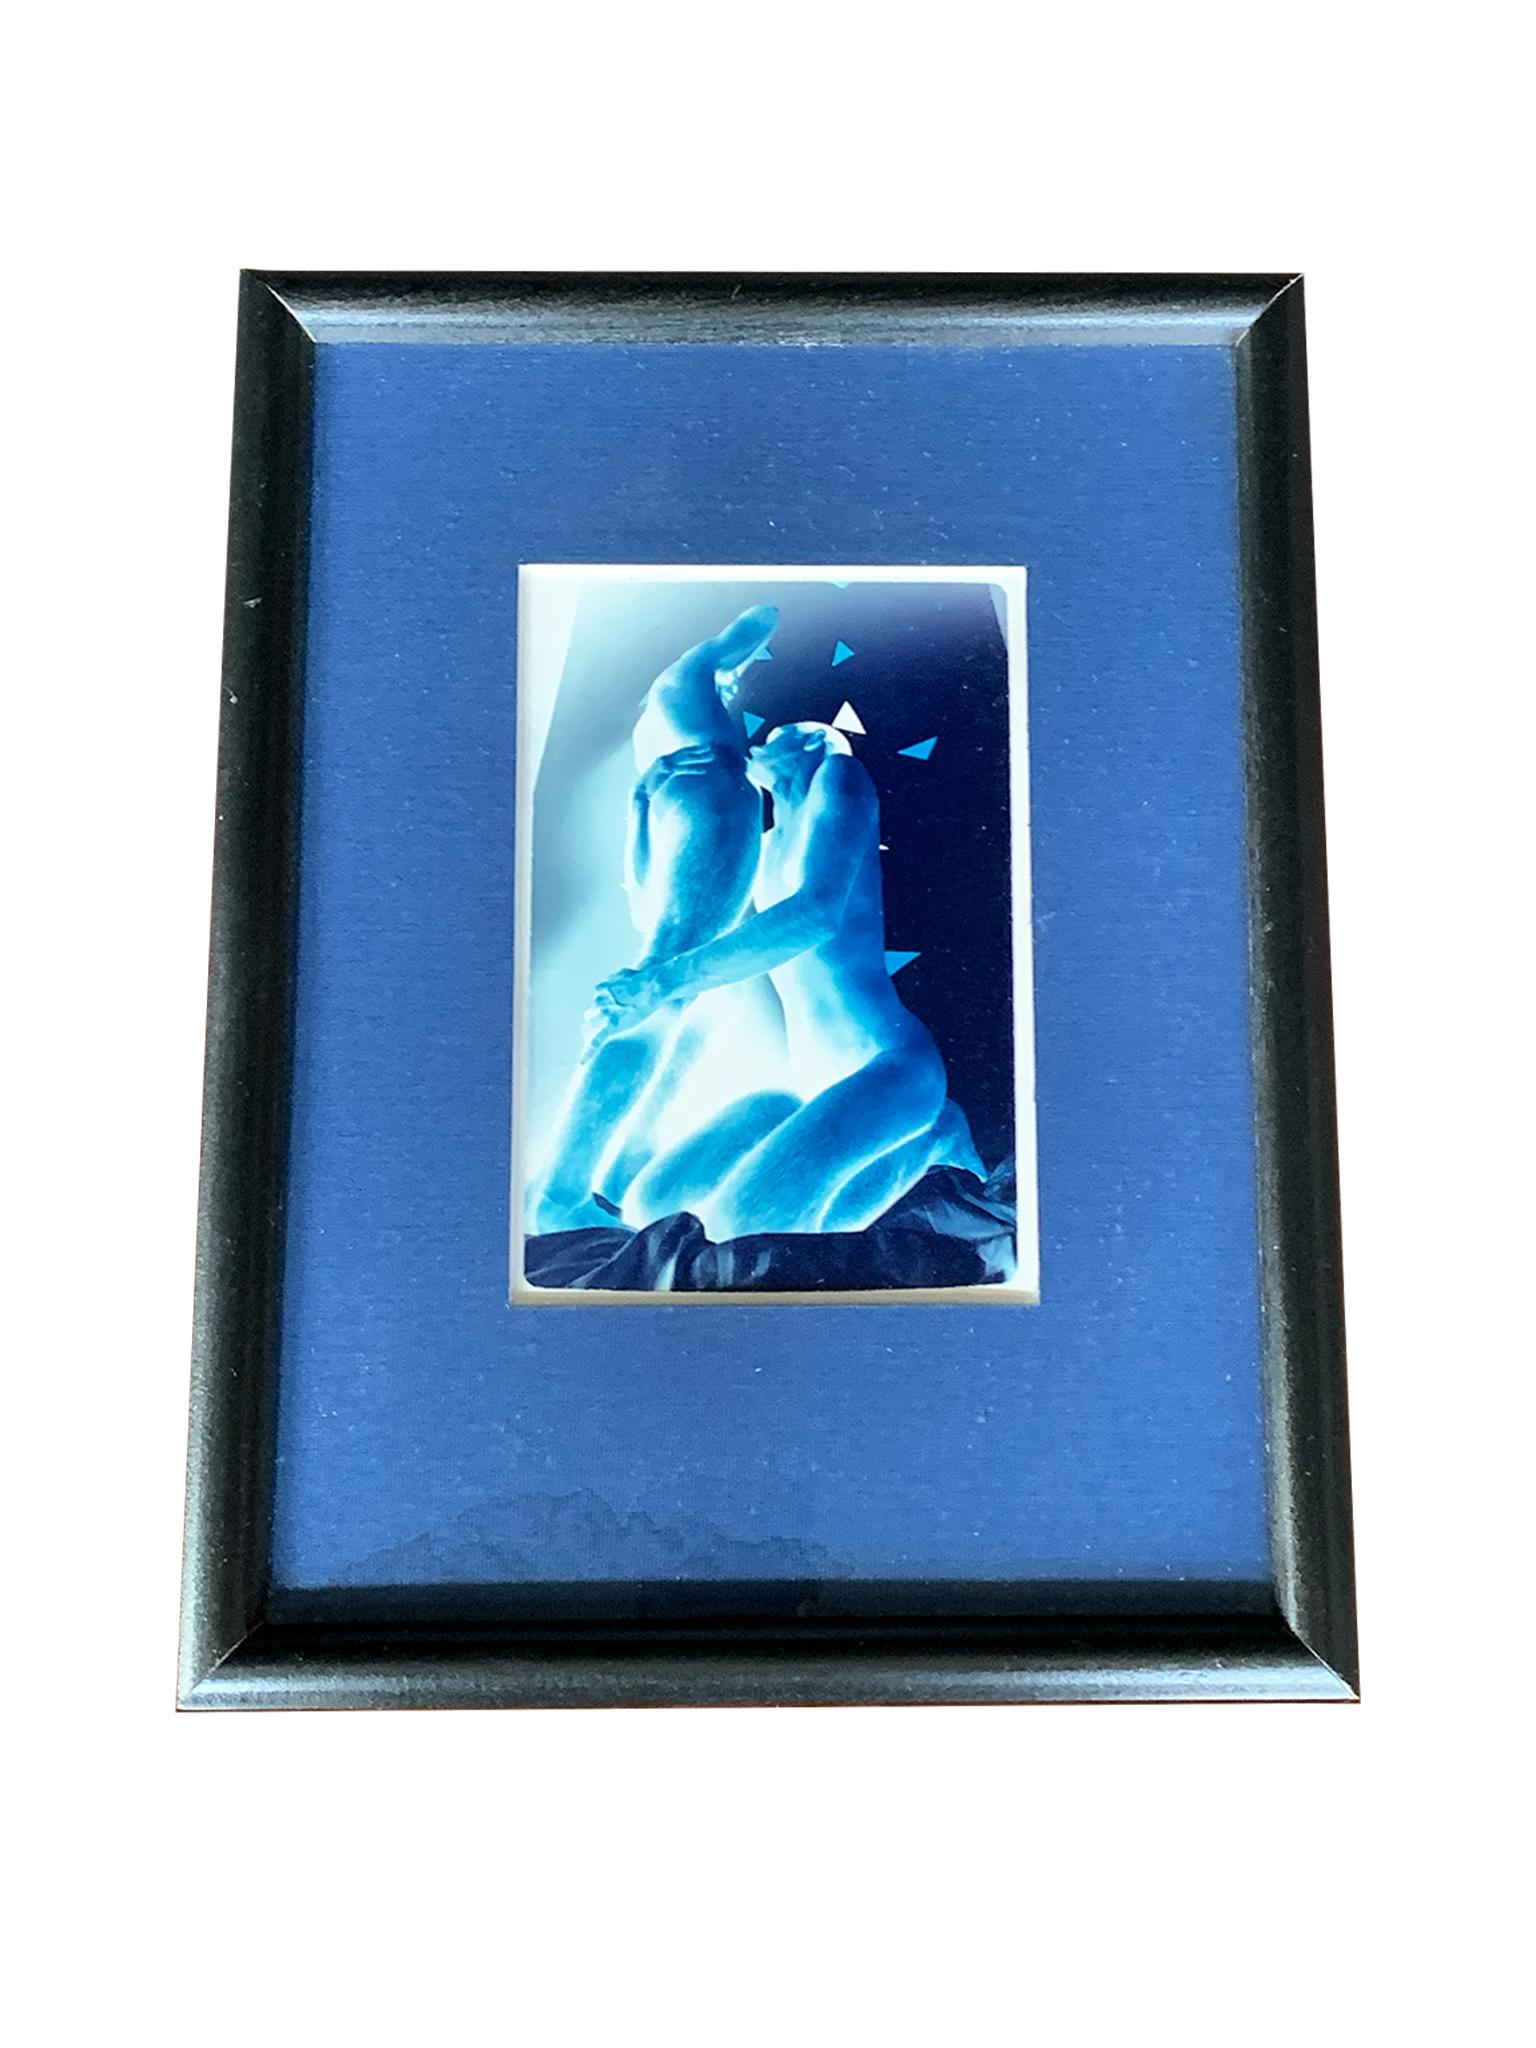 This small cyanotype photograph is by the late American artist Steph Gorkii. It's a beautiful, sensual image of two figures in an intimate embrace. Gorkii depicts them in the negative, their bodies abstracted and glowing, creating a powerful, stark